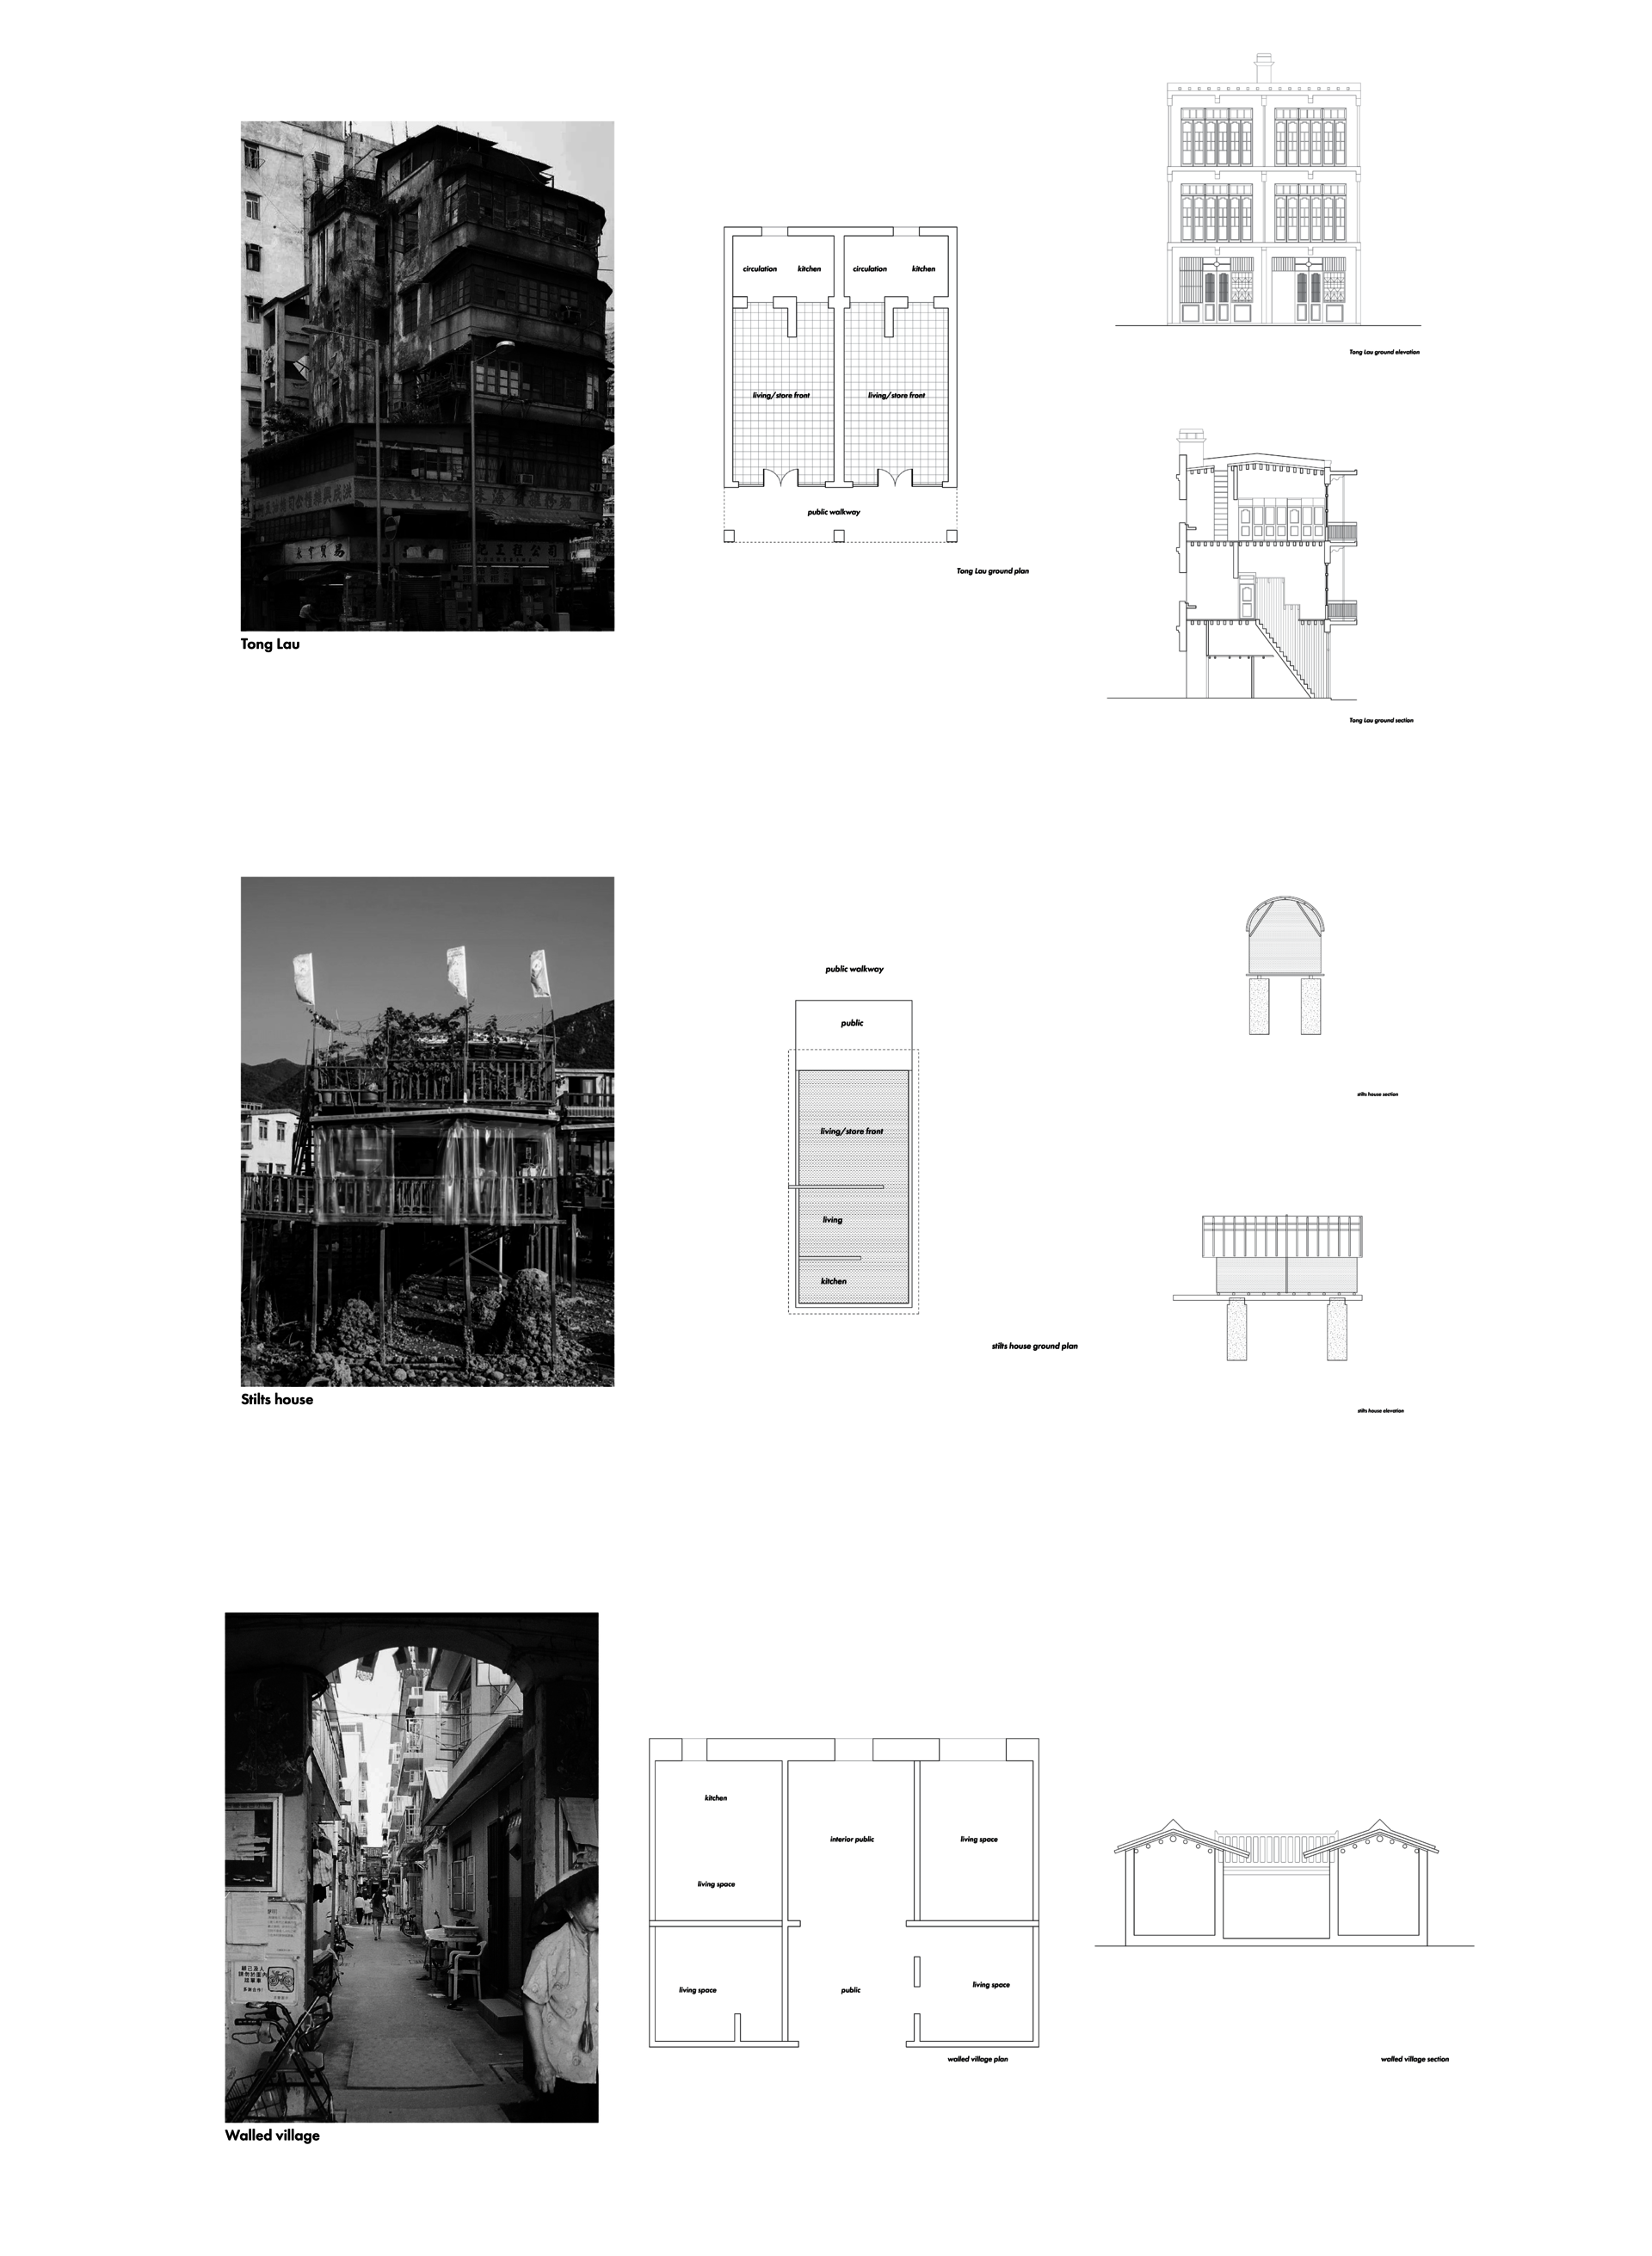 studies and documentaion of vanacular architecture styles